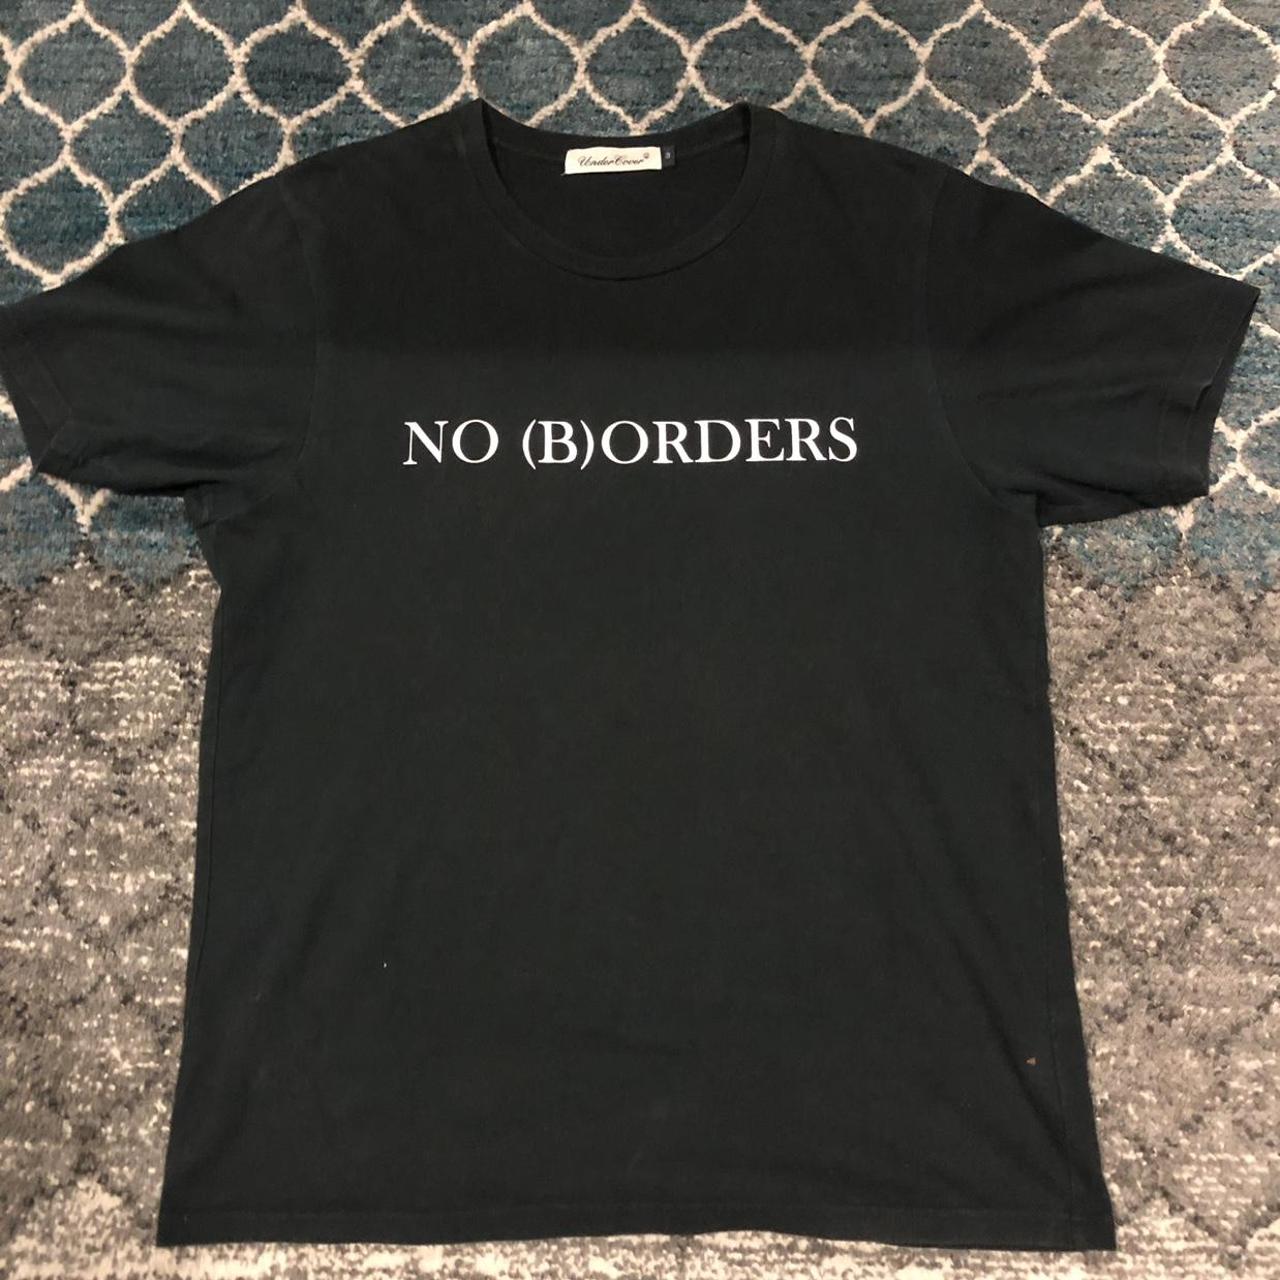 Product Image 1 - •Undercover “No (B)orders” Tee
•Great condition!